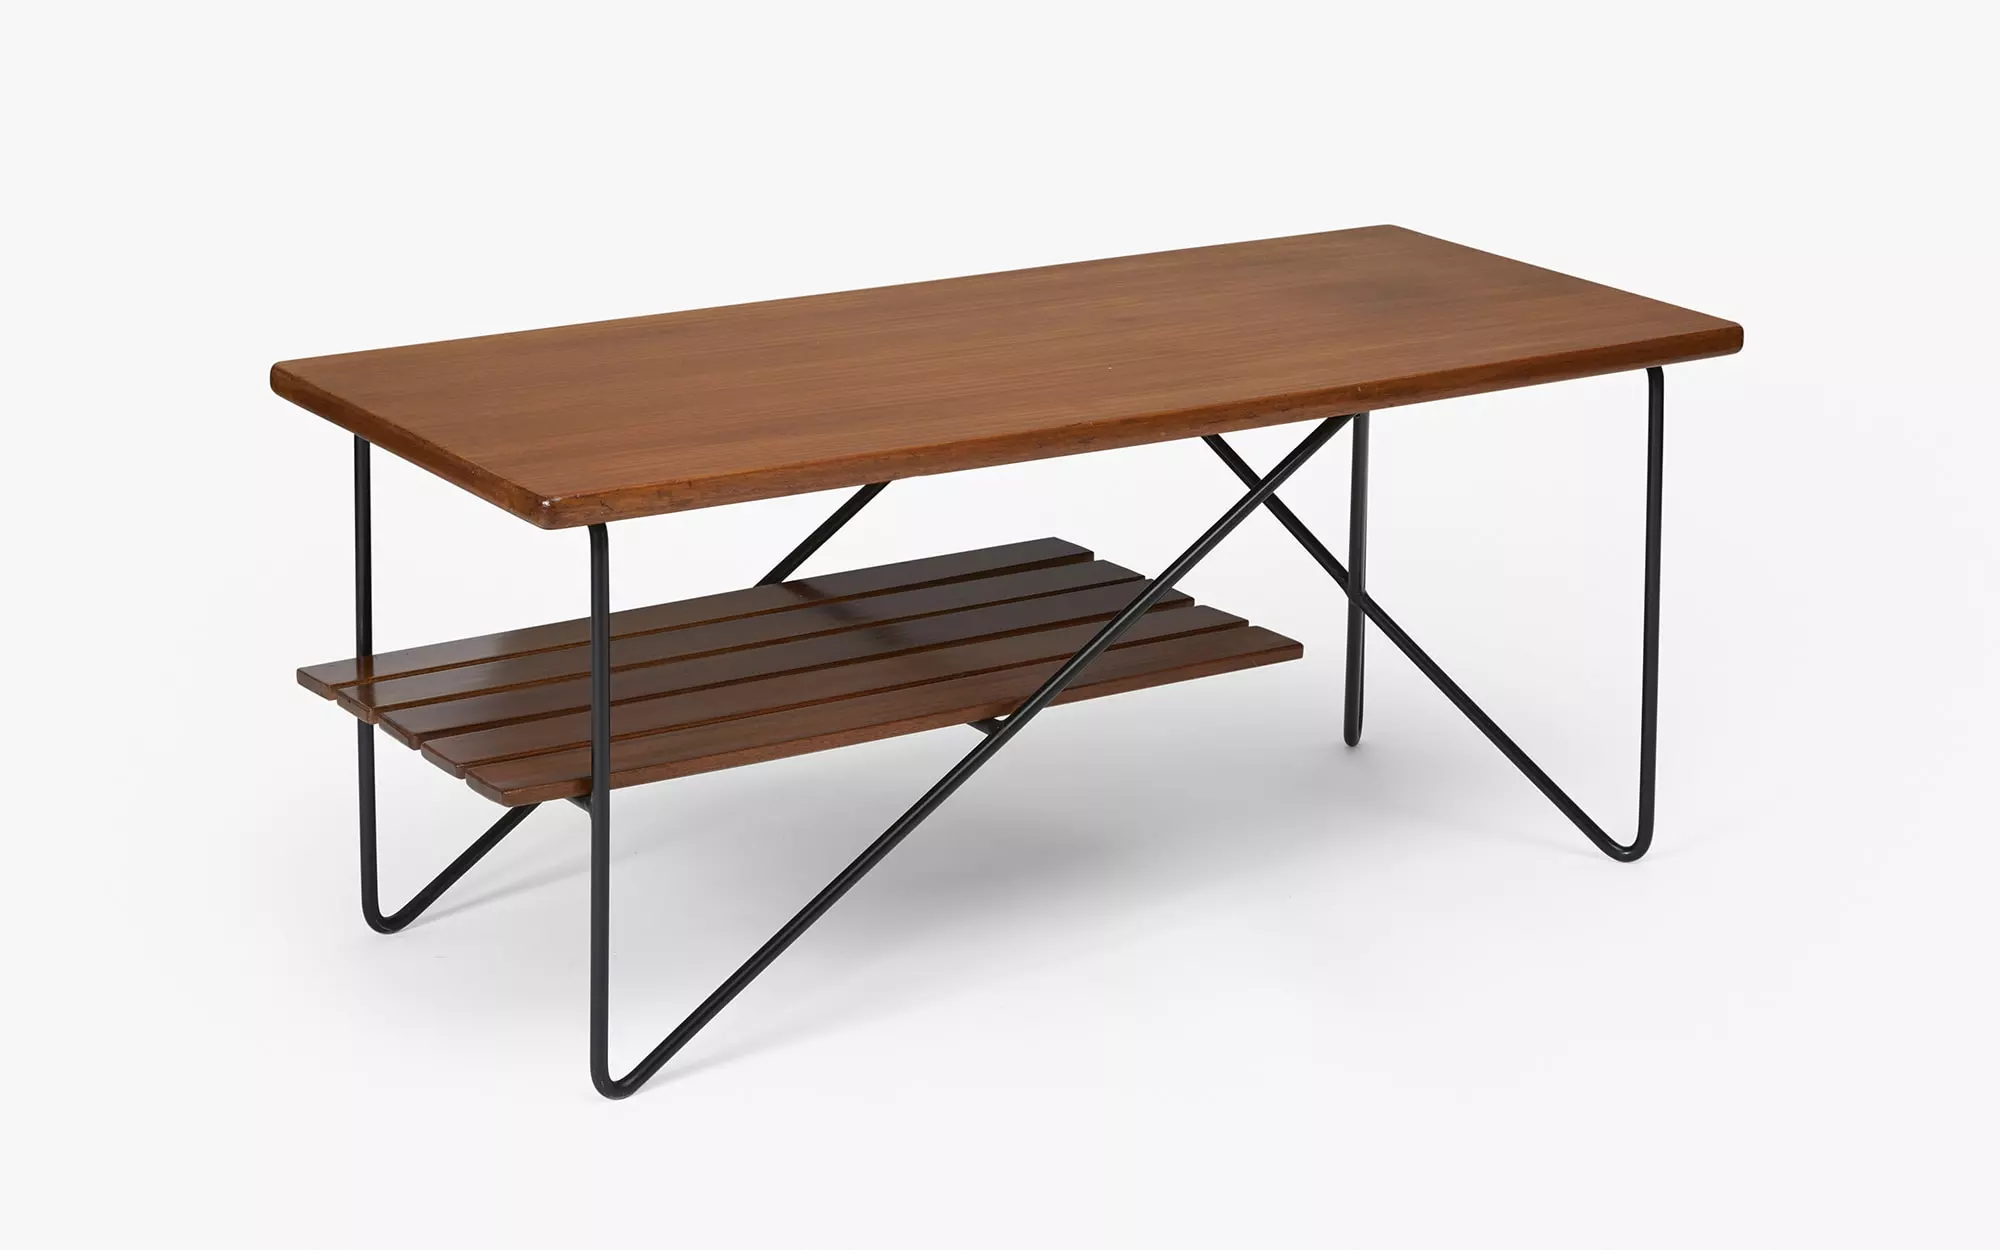 GC56 coffee table - René-Jean Caillette - Seating - Galerie kreo